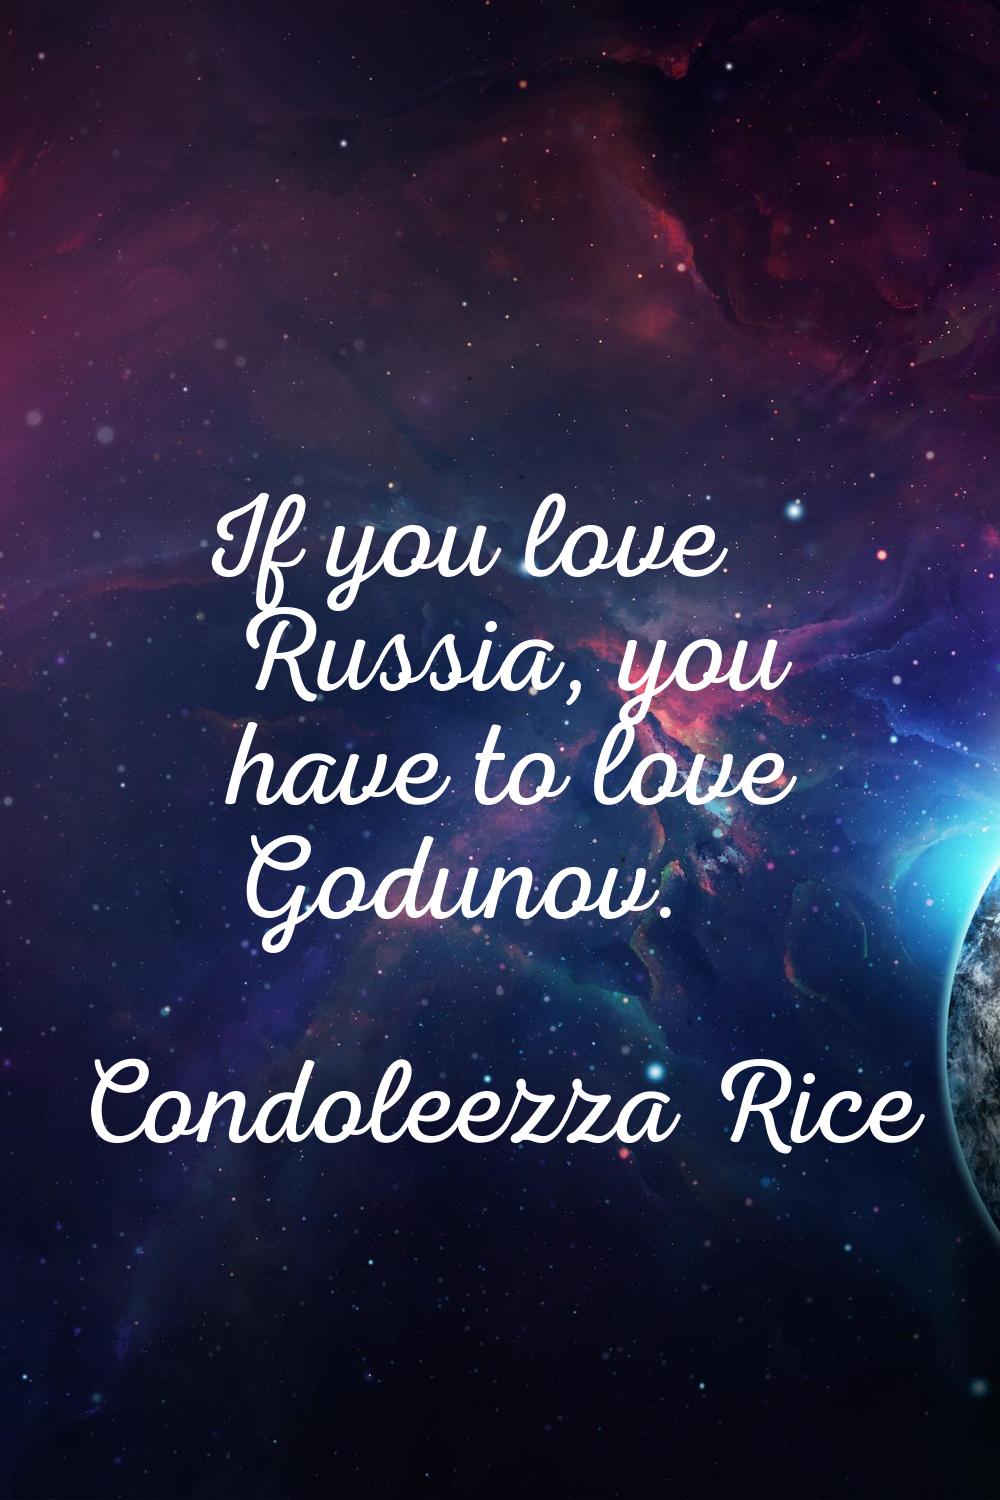 If you love Russia, you have to love Godunov.